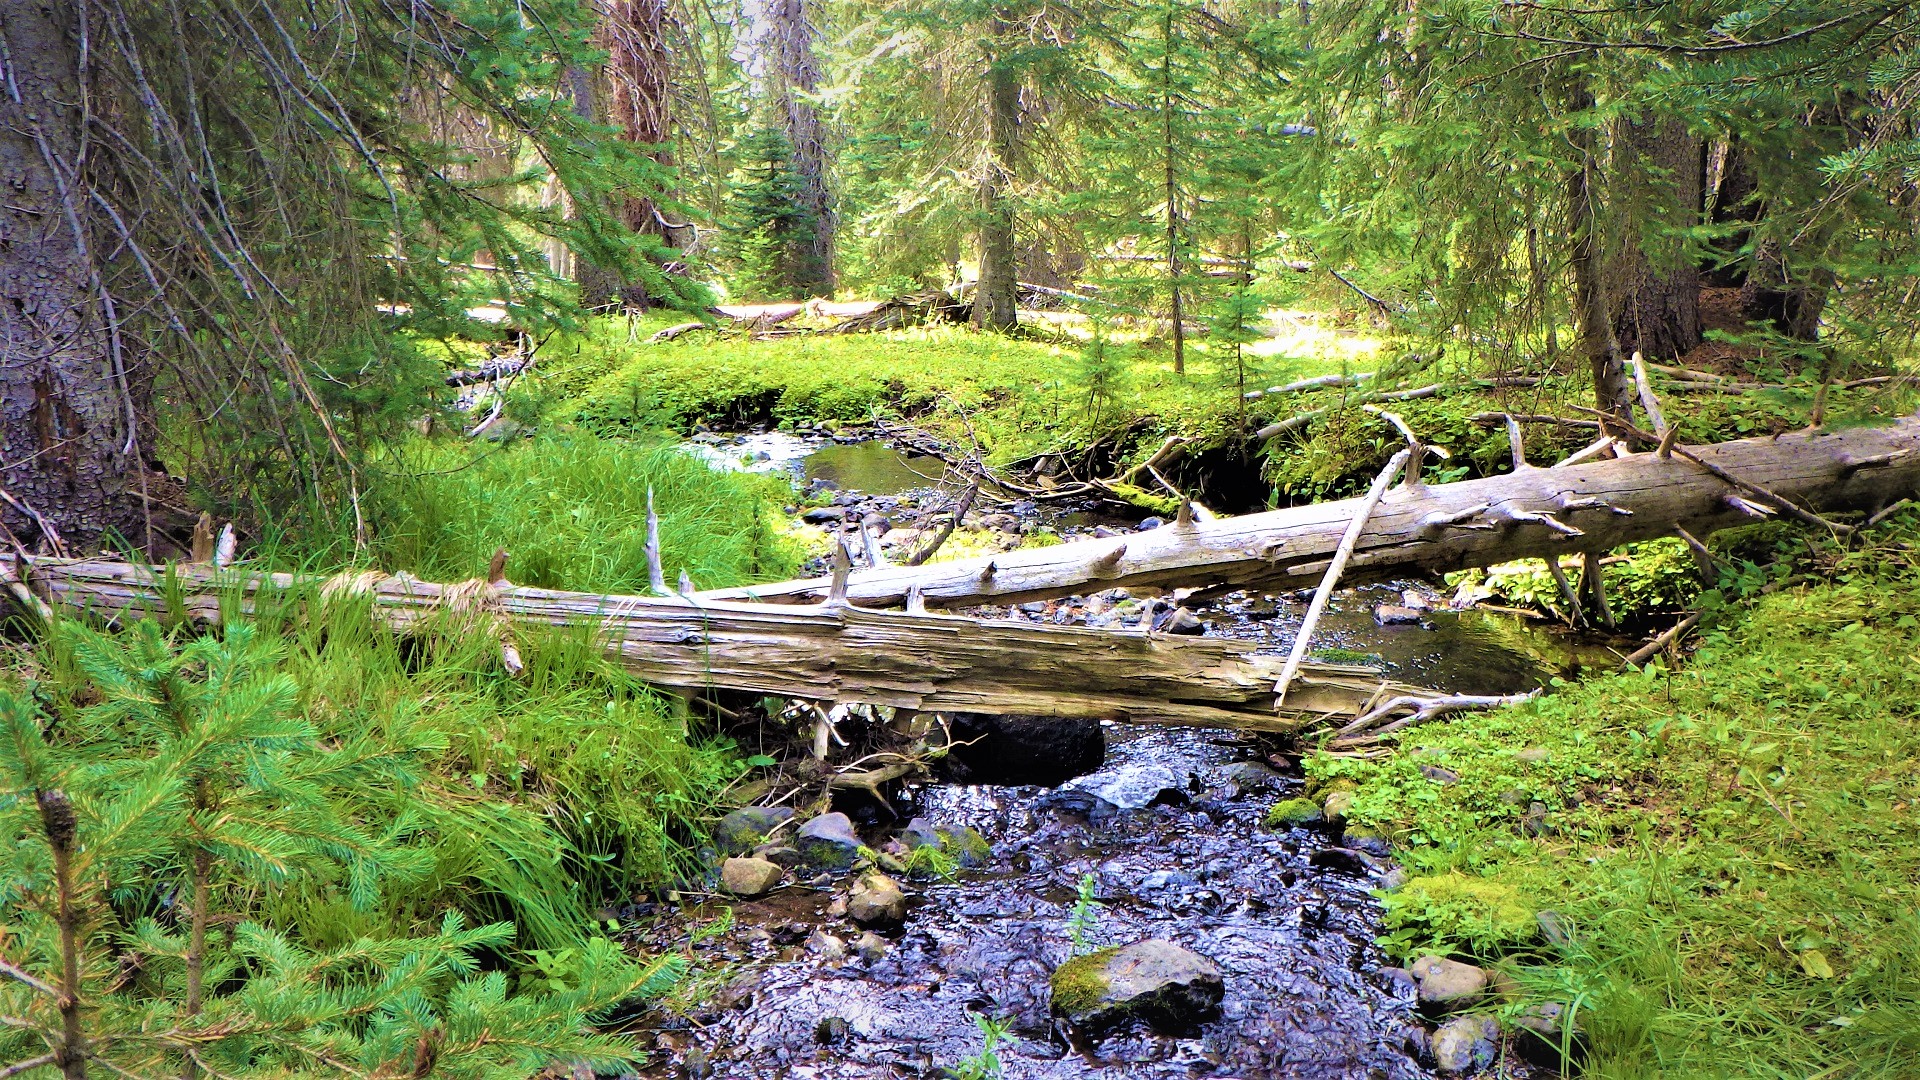 A shallow stream with multiple logs in the channel